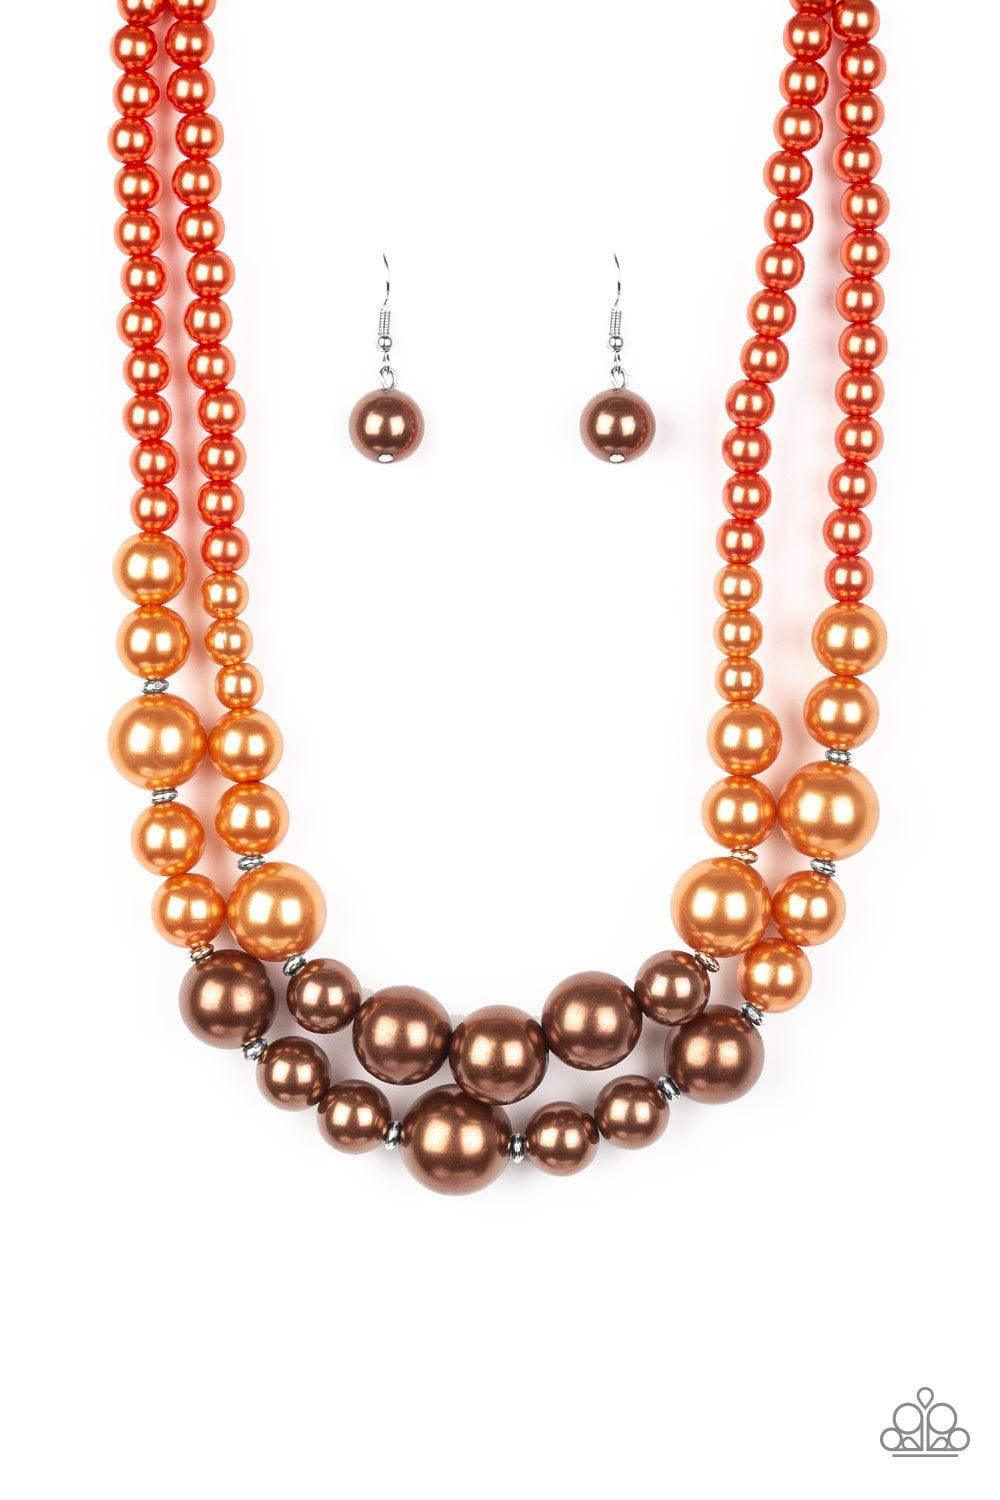 Paparazzi Accessories - The More The Modest - Multicolor Necklace - Bling by JessieK